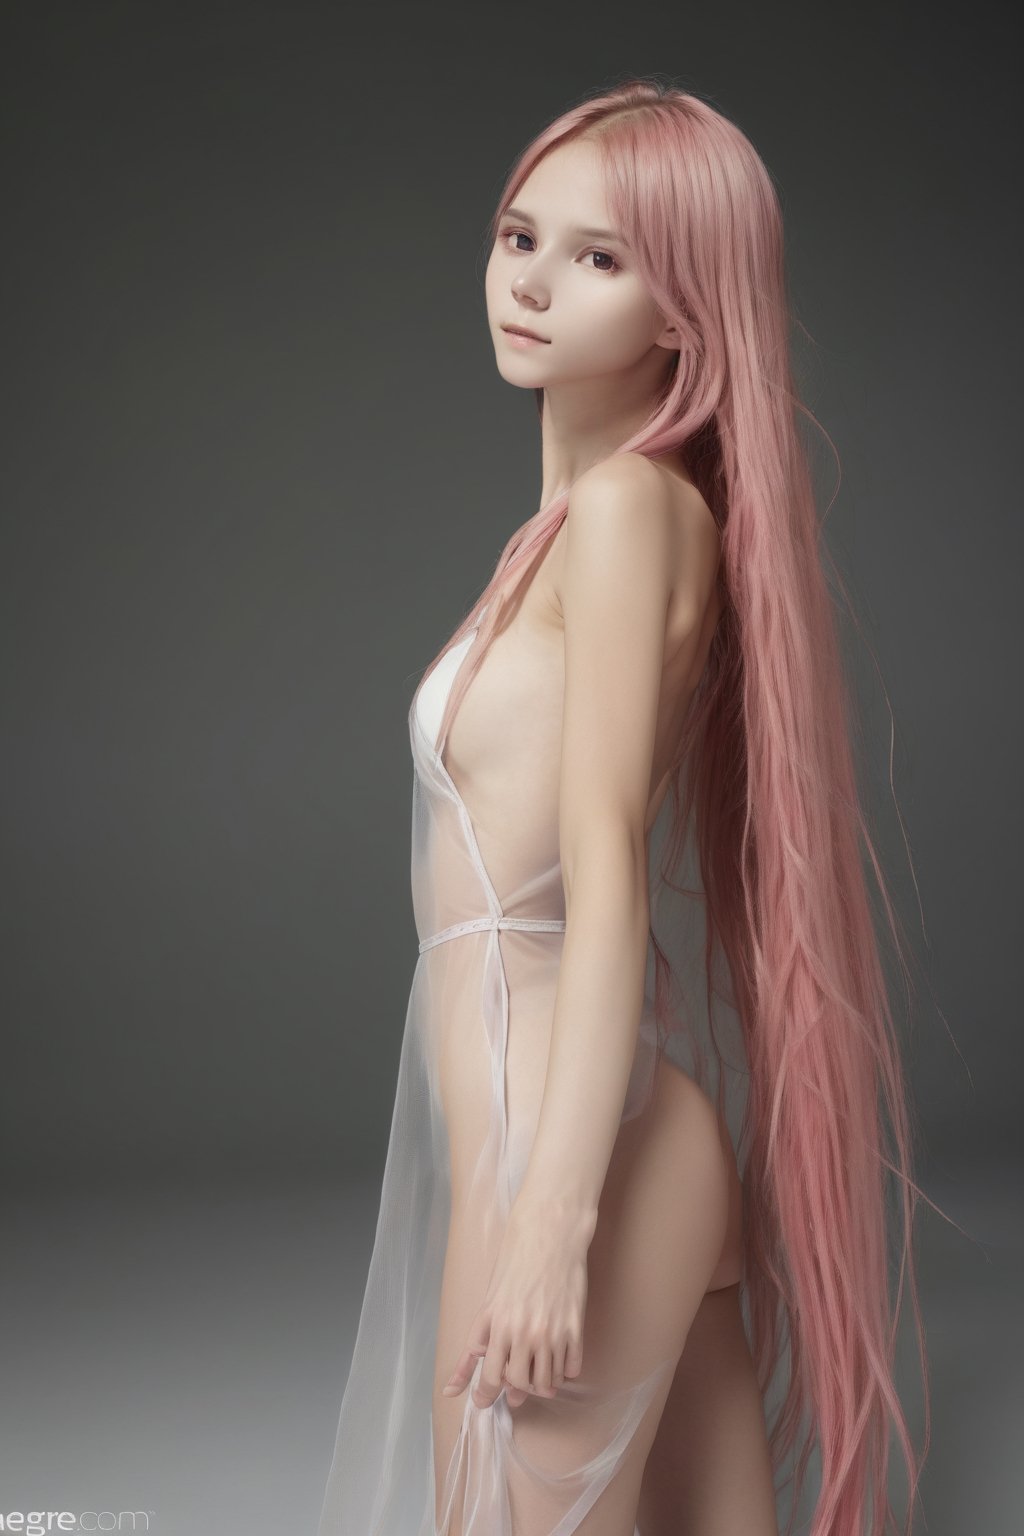 masterpiece,  extremely best quality,  official art,  cg 8k wallpaper,  (Fantasy Style:1.1),  (artistic atmosphere:1.2),  (full body:1.4),  (Korean style:1.3),  (nsfw,  seductively charming:1.5),  (1 woman,  20 years old,  long pink hair:1.2),  (bare shoulders:1.5),  (see-through_silhouette:1.4),  (narrow waist:1.22),  pixiv 10000 users,  highly detailed,  pixiv,  (beautiful face),  incredibly detailed,  (an extremely  beautiful),  (best quality)
,